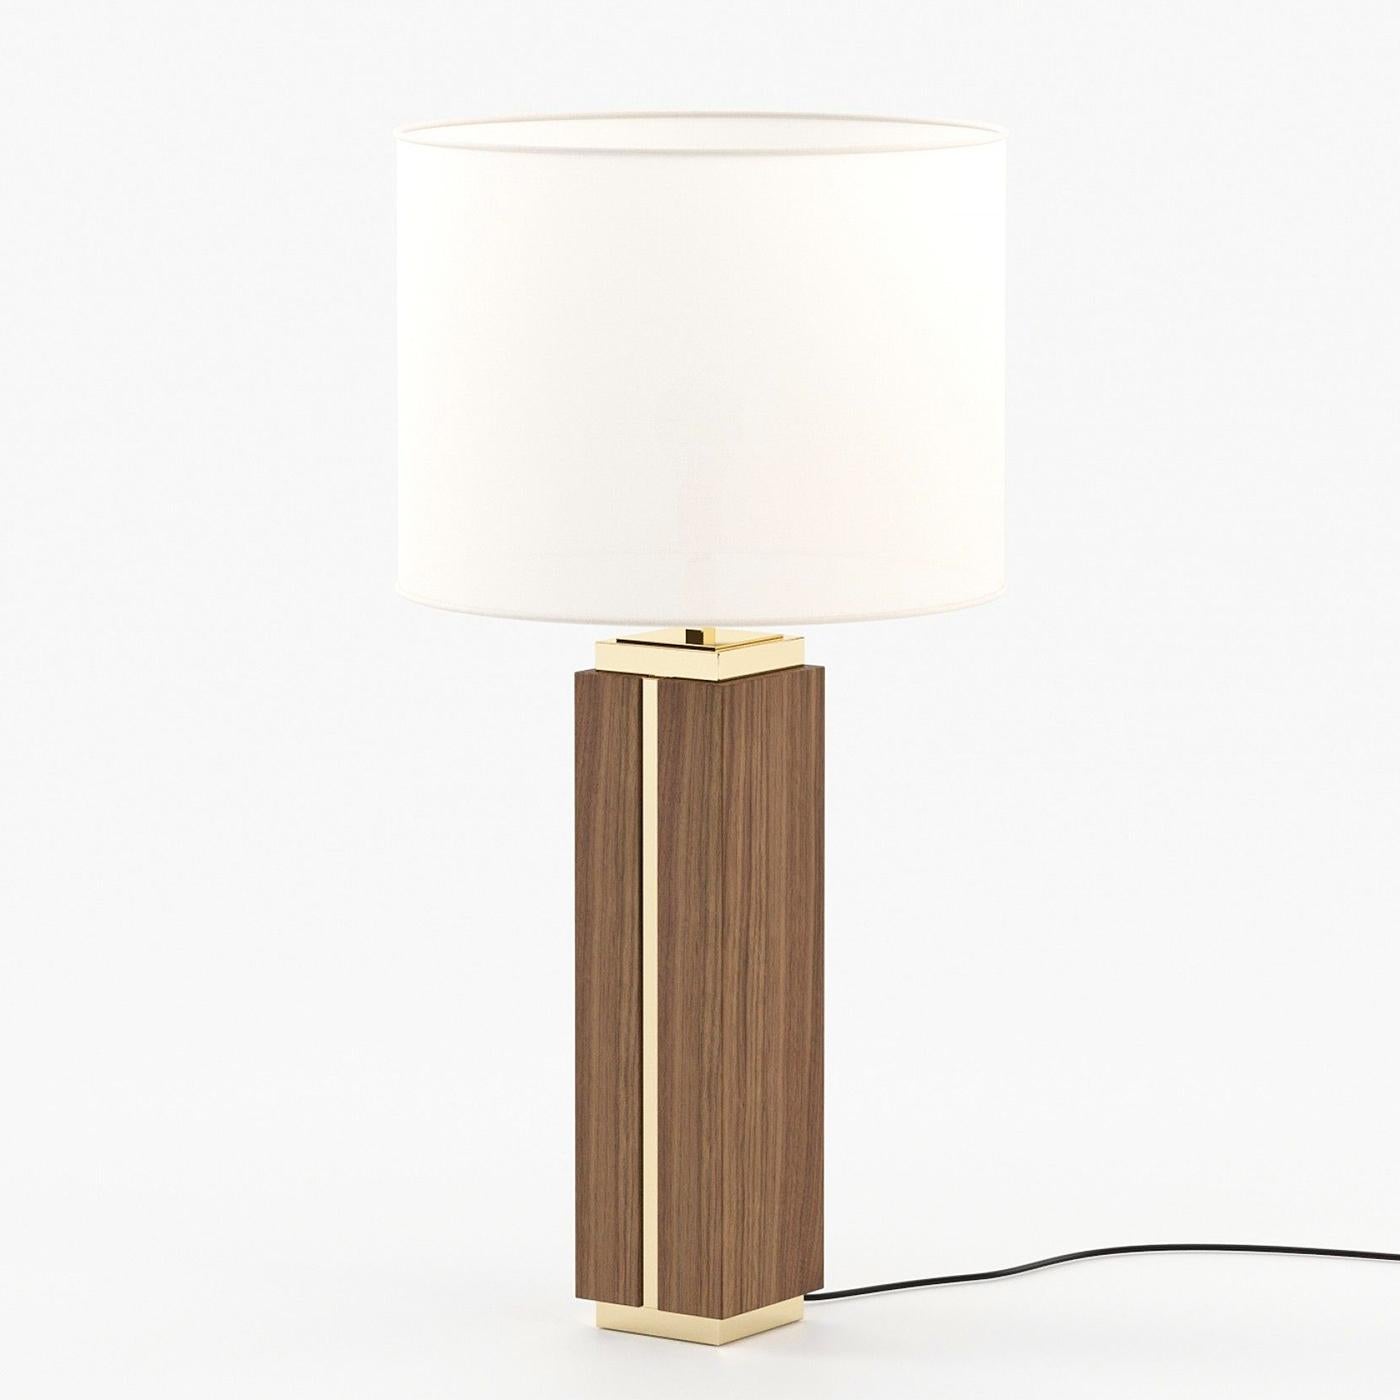 Table Lamp Dounia Walnut with walnut wood and
polished stainless steel base in, stainless steel in 
gold finish, including a white lamp shade.
1 Bulb, lamp holder type E27, max 40 watt, bulb not
included. Also available with other wood finish,